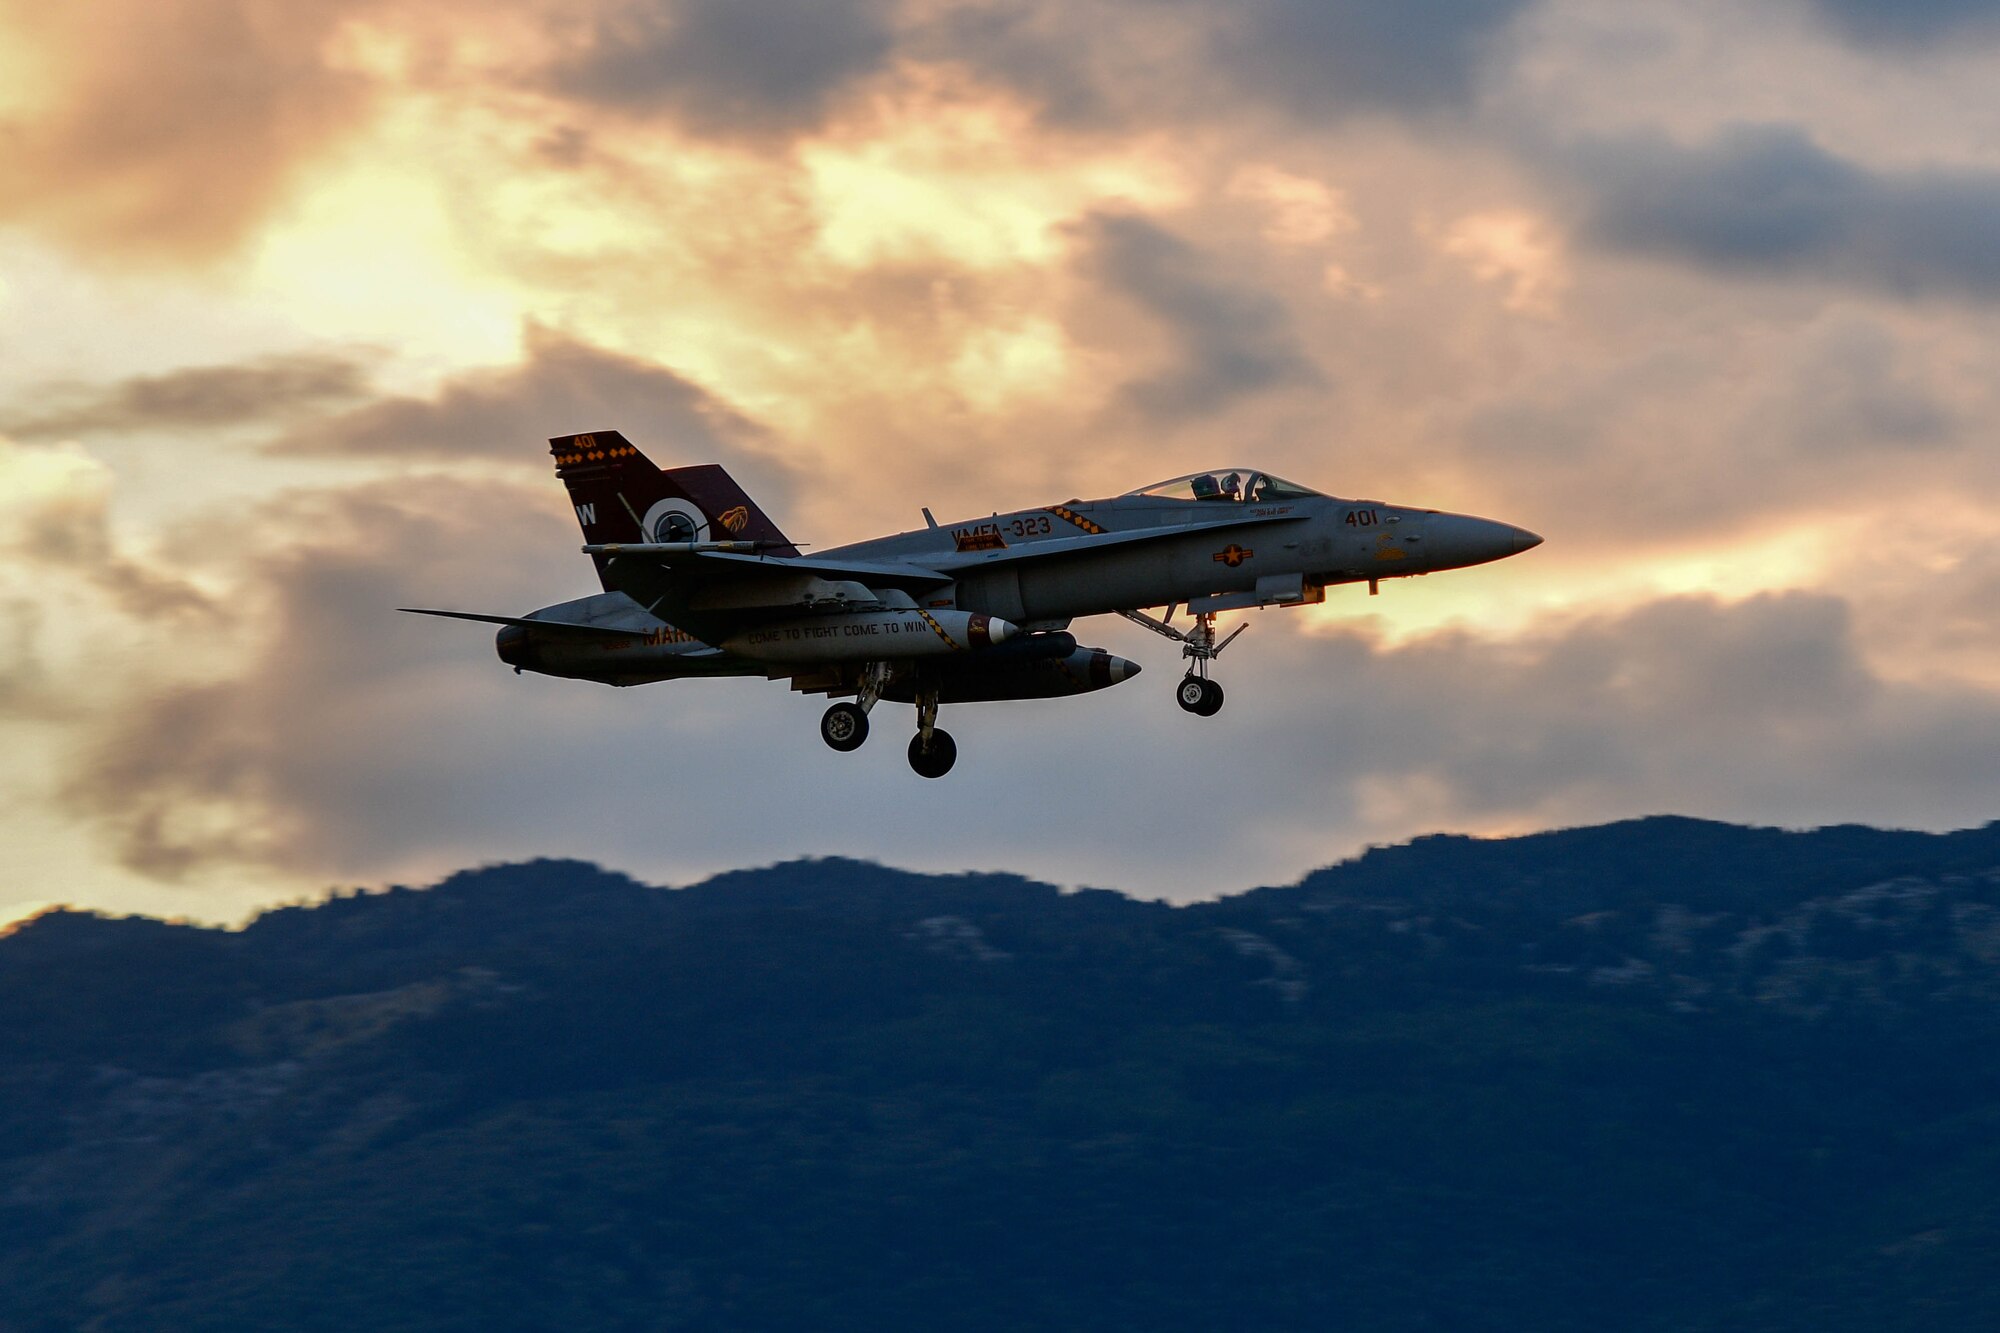 A U.S. Marine Corps F/A-18 Hornet assigned to the Marine Fighter Attack Squadron 323 based out of Marine Corps Air Station Miramar, California, prepares to land at Aviano Air Base, Italy, Sept. 20, 2022. During the training flights, Marines from the VMFA-323 Squadron flew F/A-18s alongside F-16 Fighting Falcon pilots assigned to the 510th Fighter Squadron. (U.S. Air Force photo by Senior Airman Brooke Moeder)